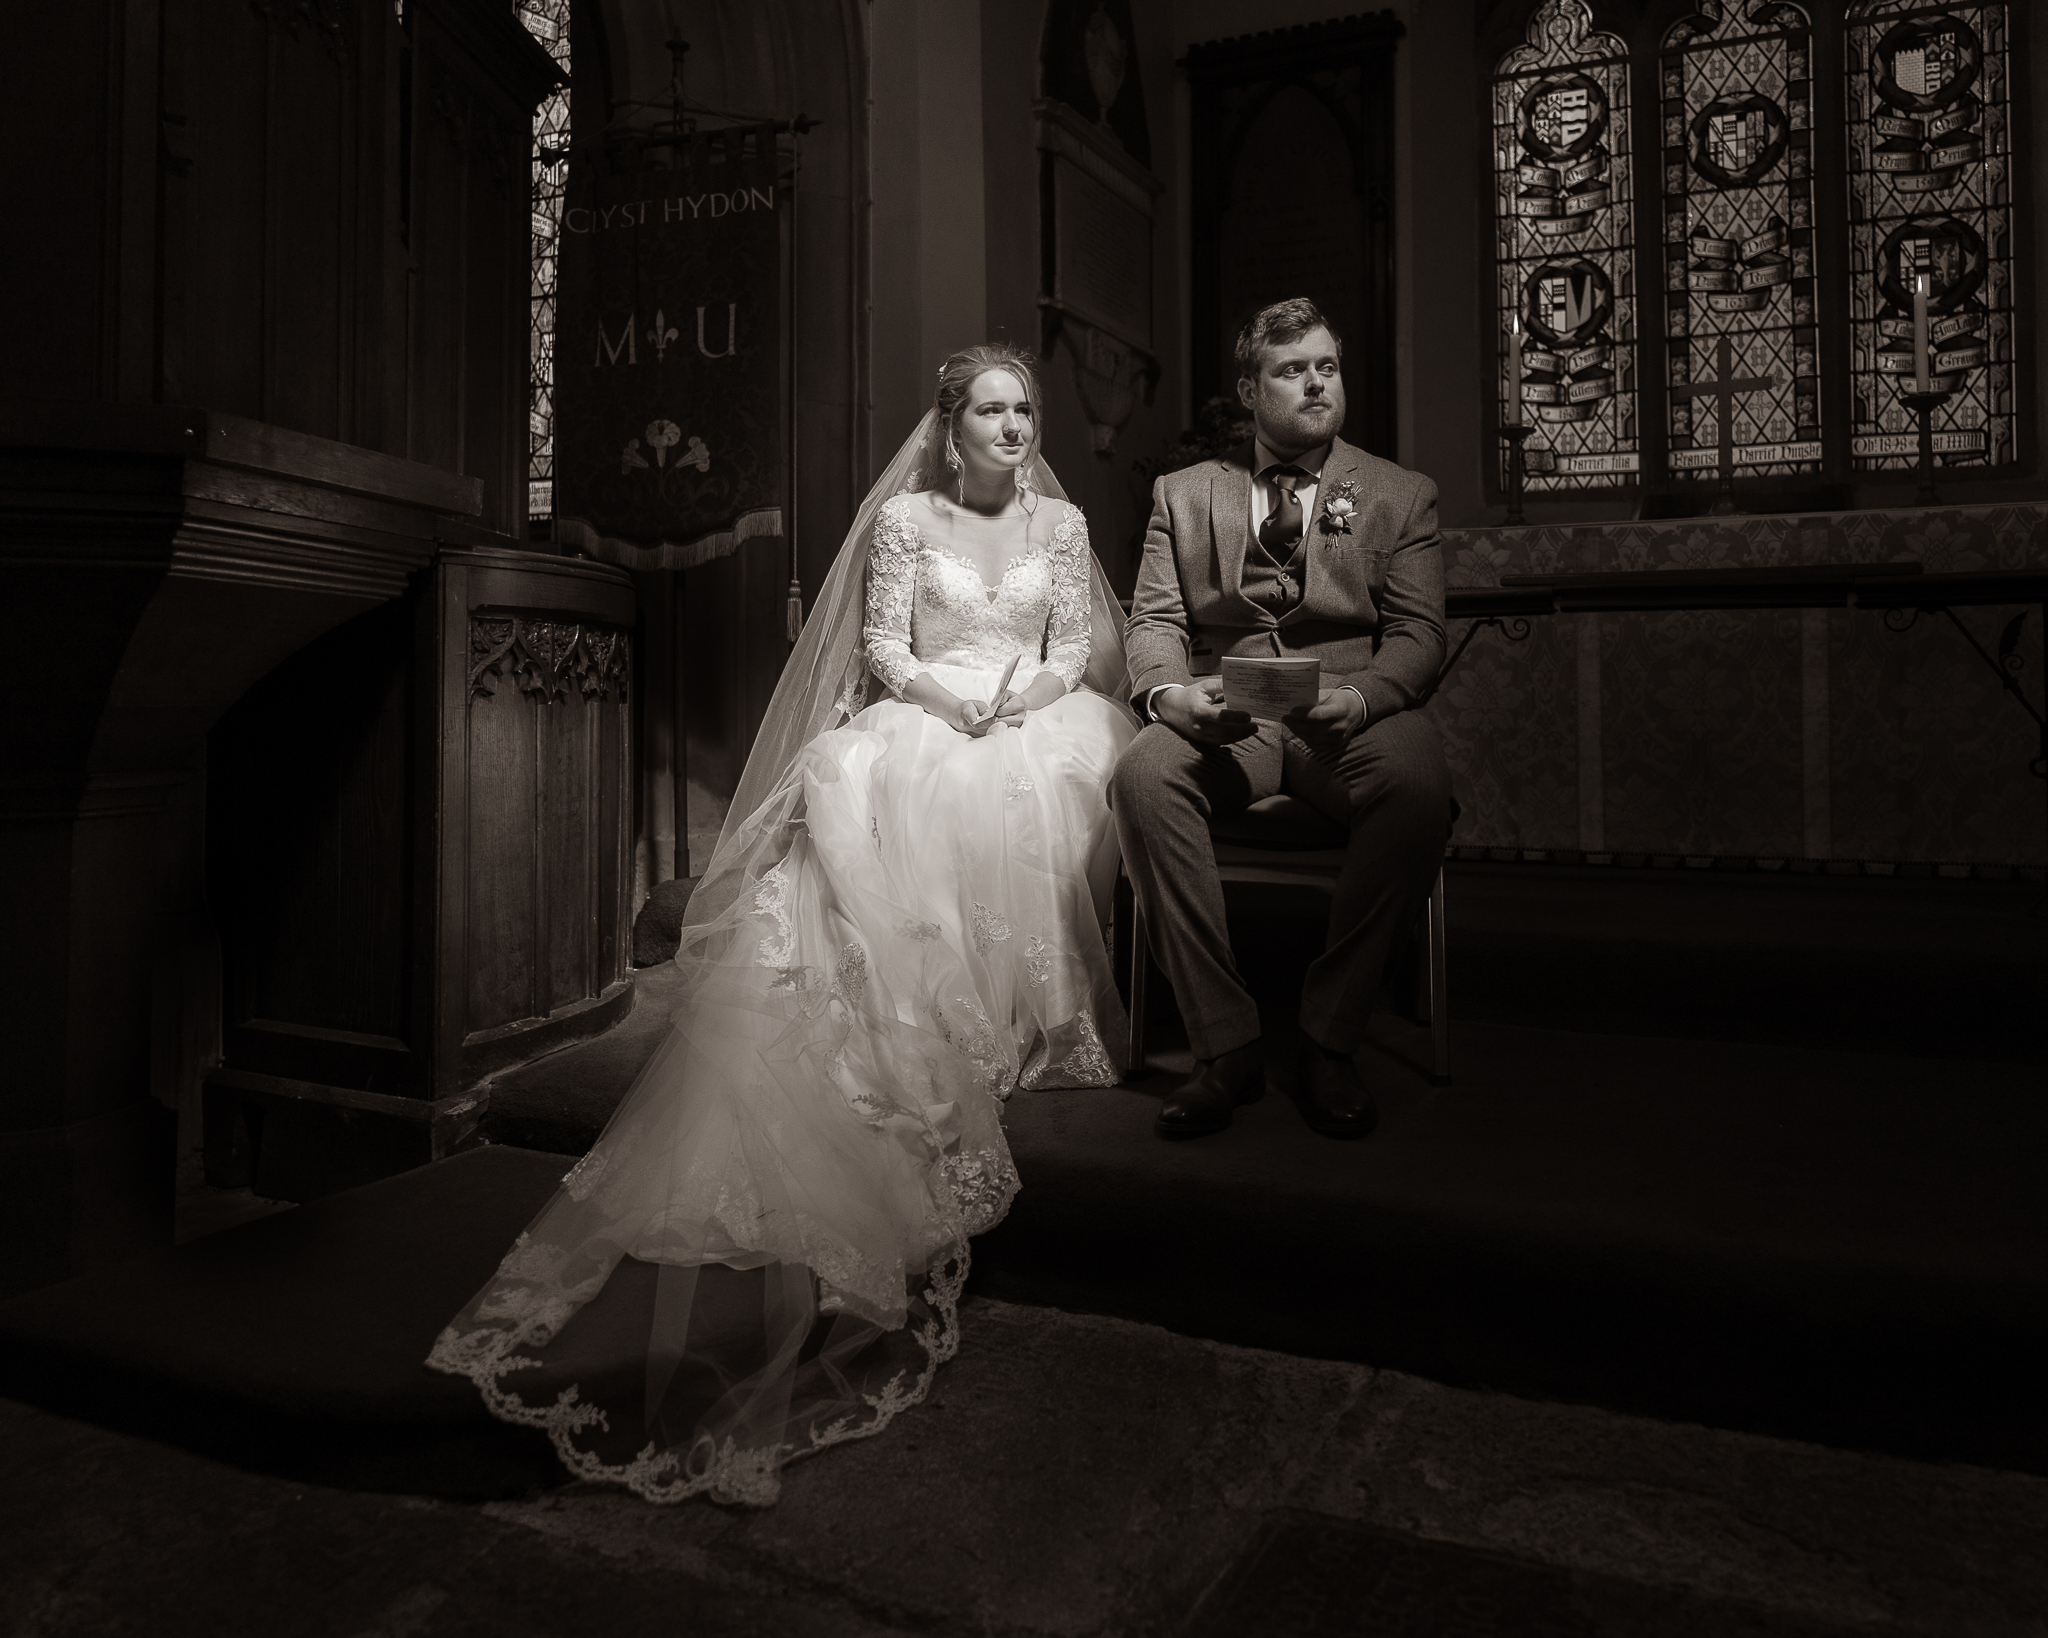 Bride and Groom inside the church